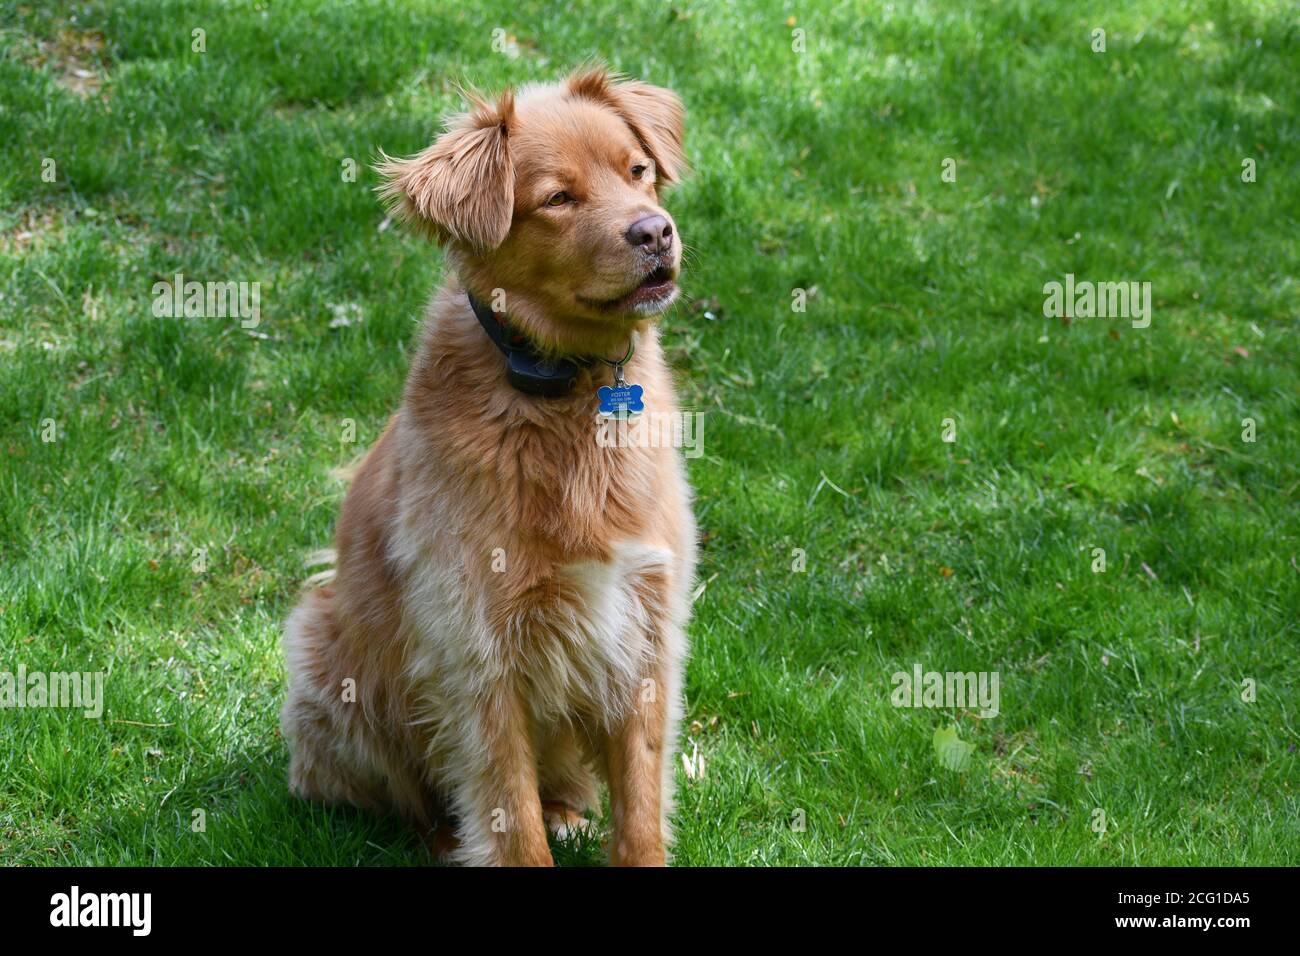 An adorable duck tolling retriever sitting on a green lawn Stock Photo